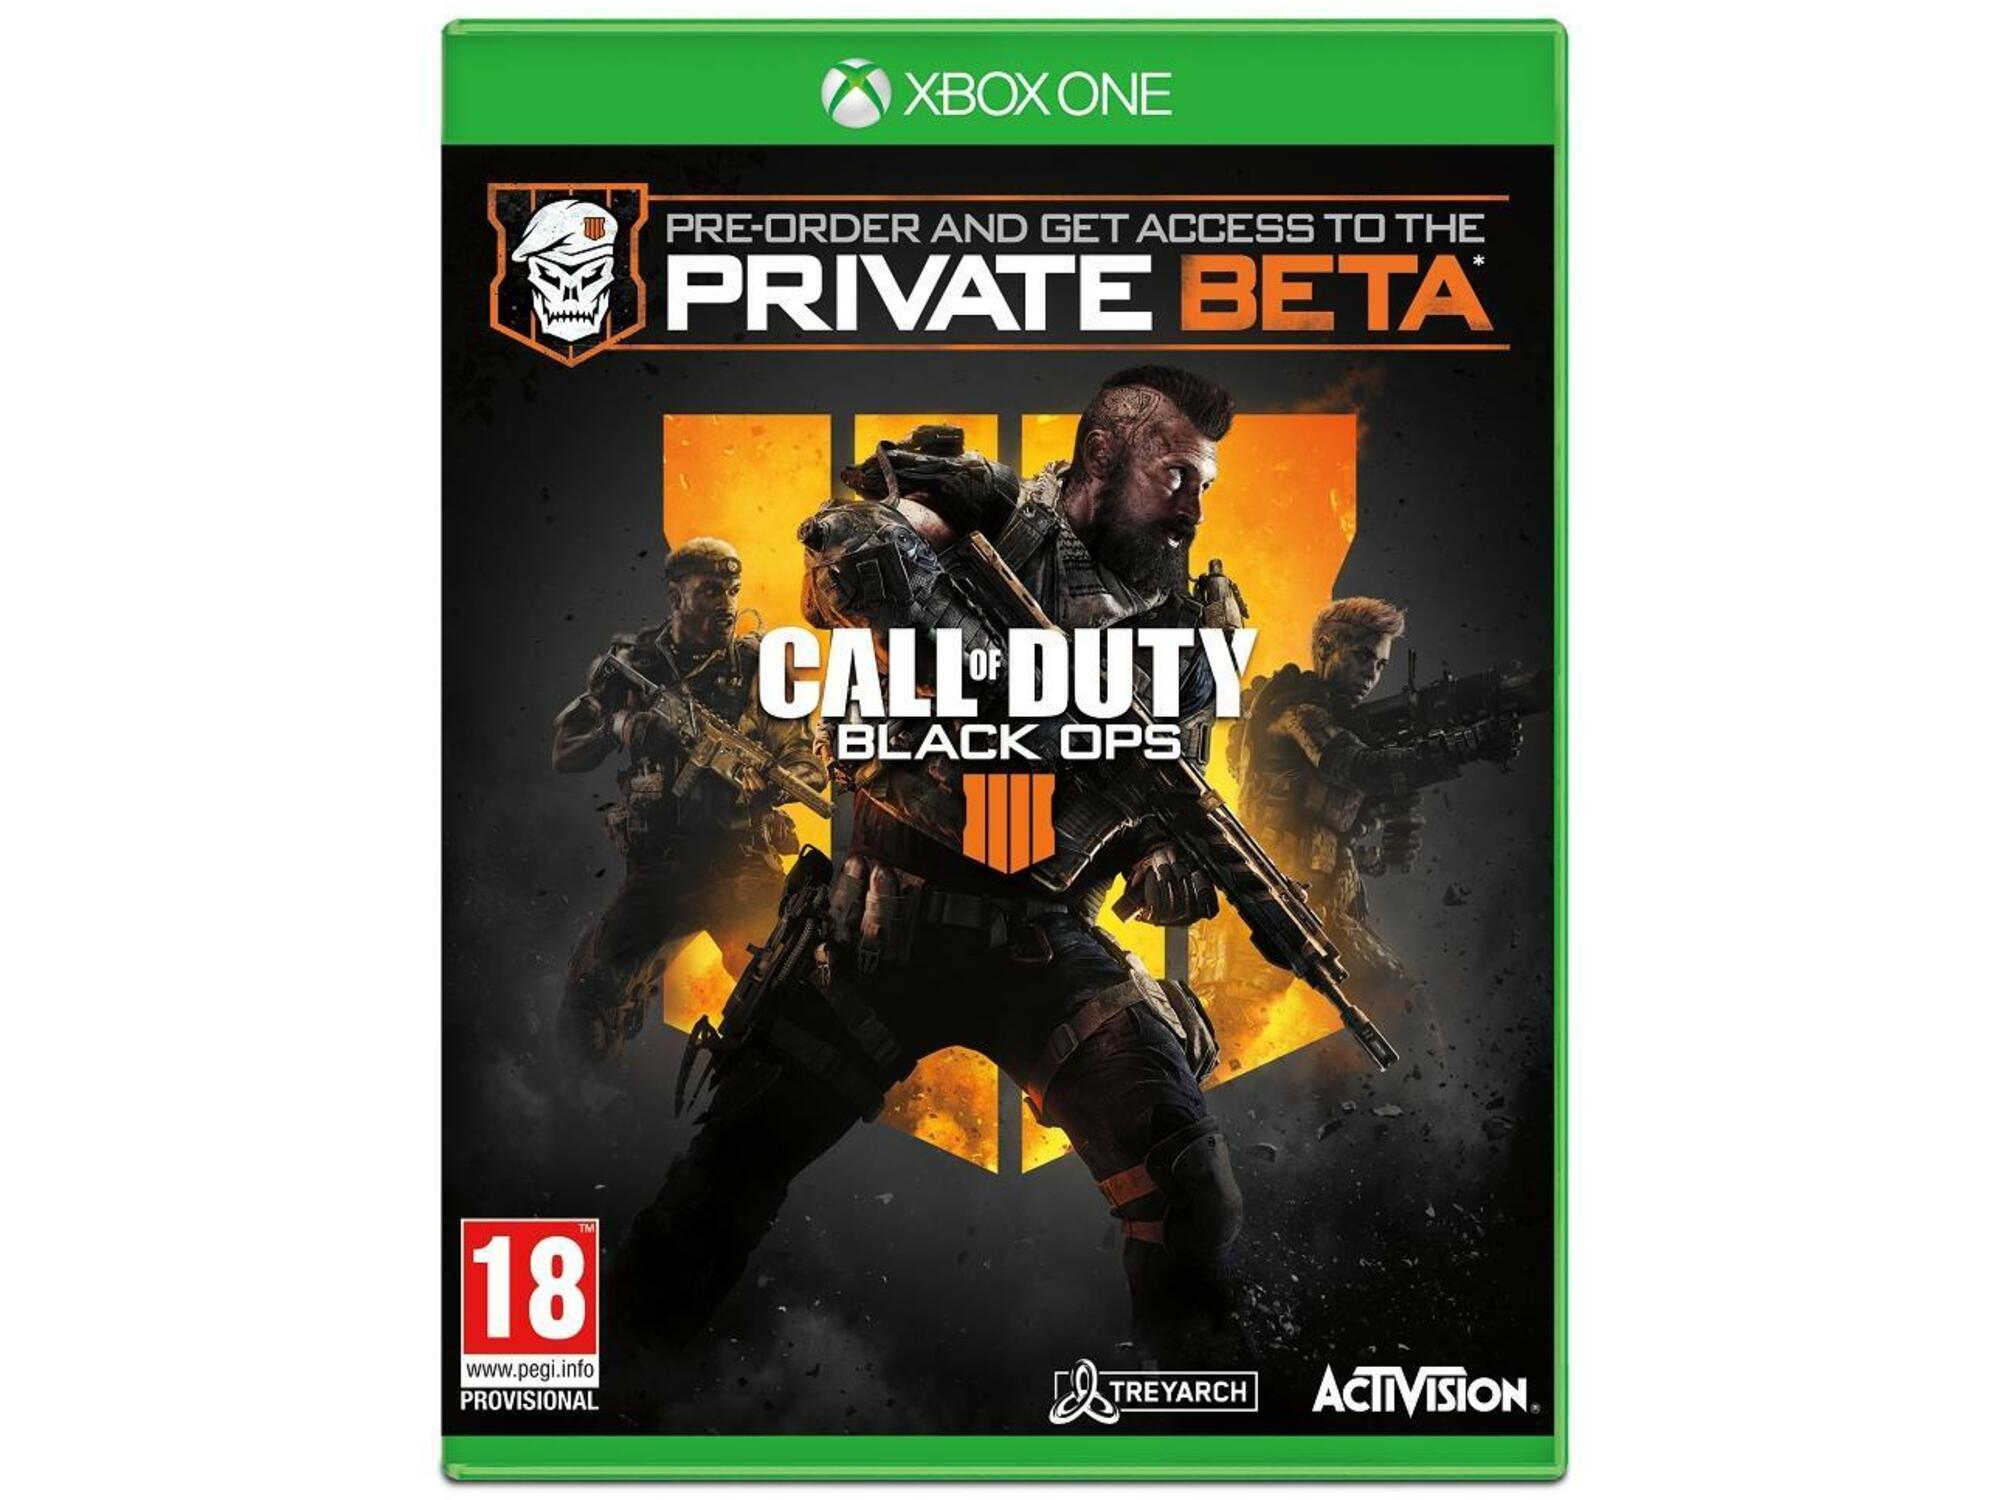 ACTIVISION BLIZZARD call of duty: black ops 4 (xbox one)